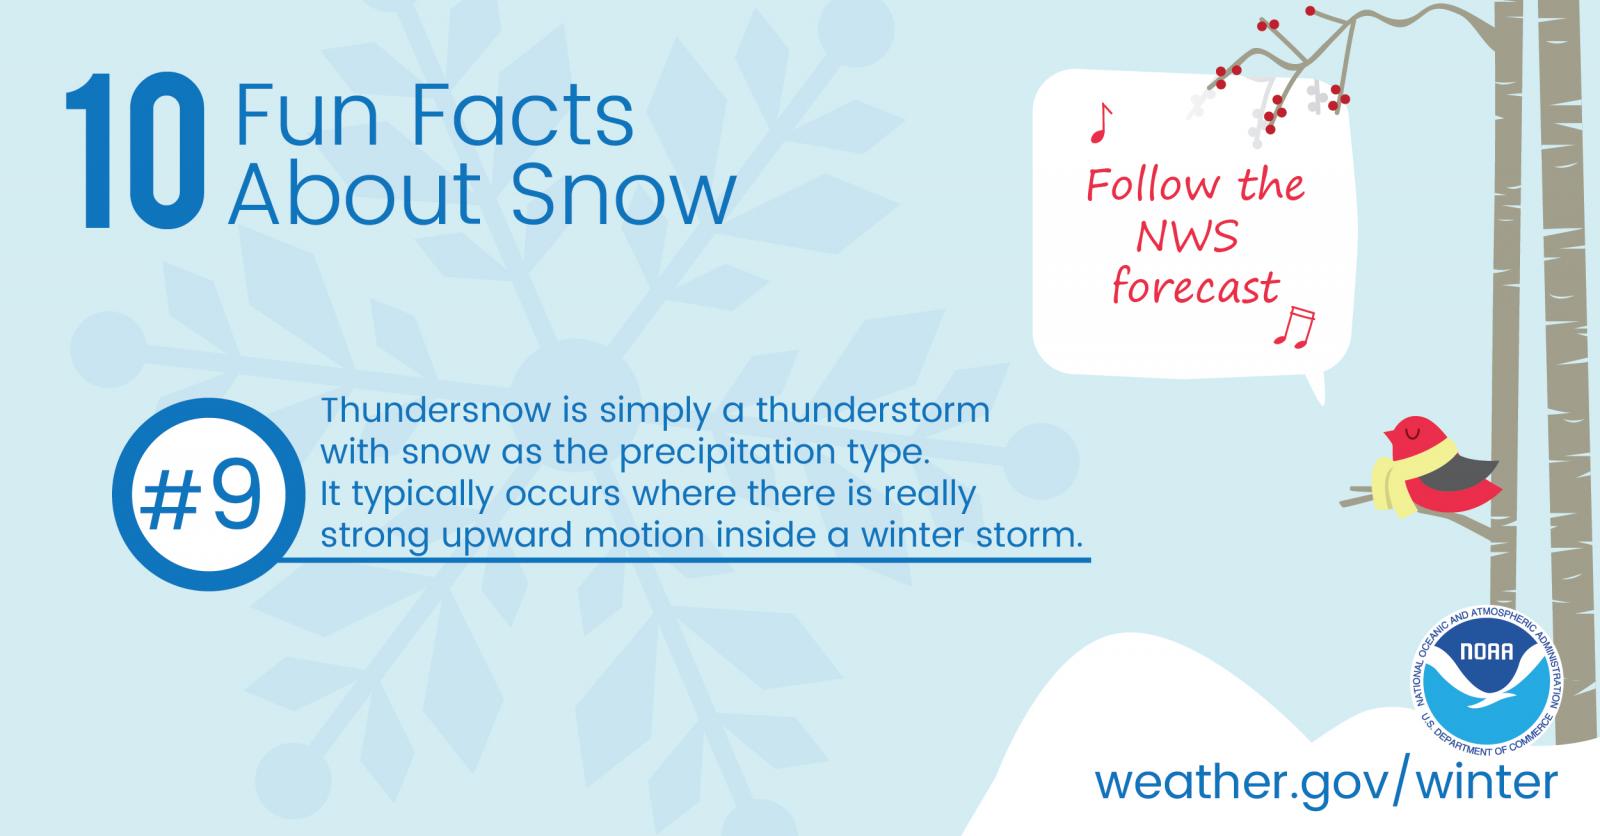 10 Fun Facts About Snow: #9. Thundersnow is simply a thunderstorm with snow as the precipitation type. It typically occurs where there is really strong upward motion inside a winter storm.